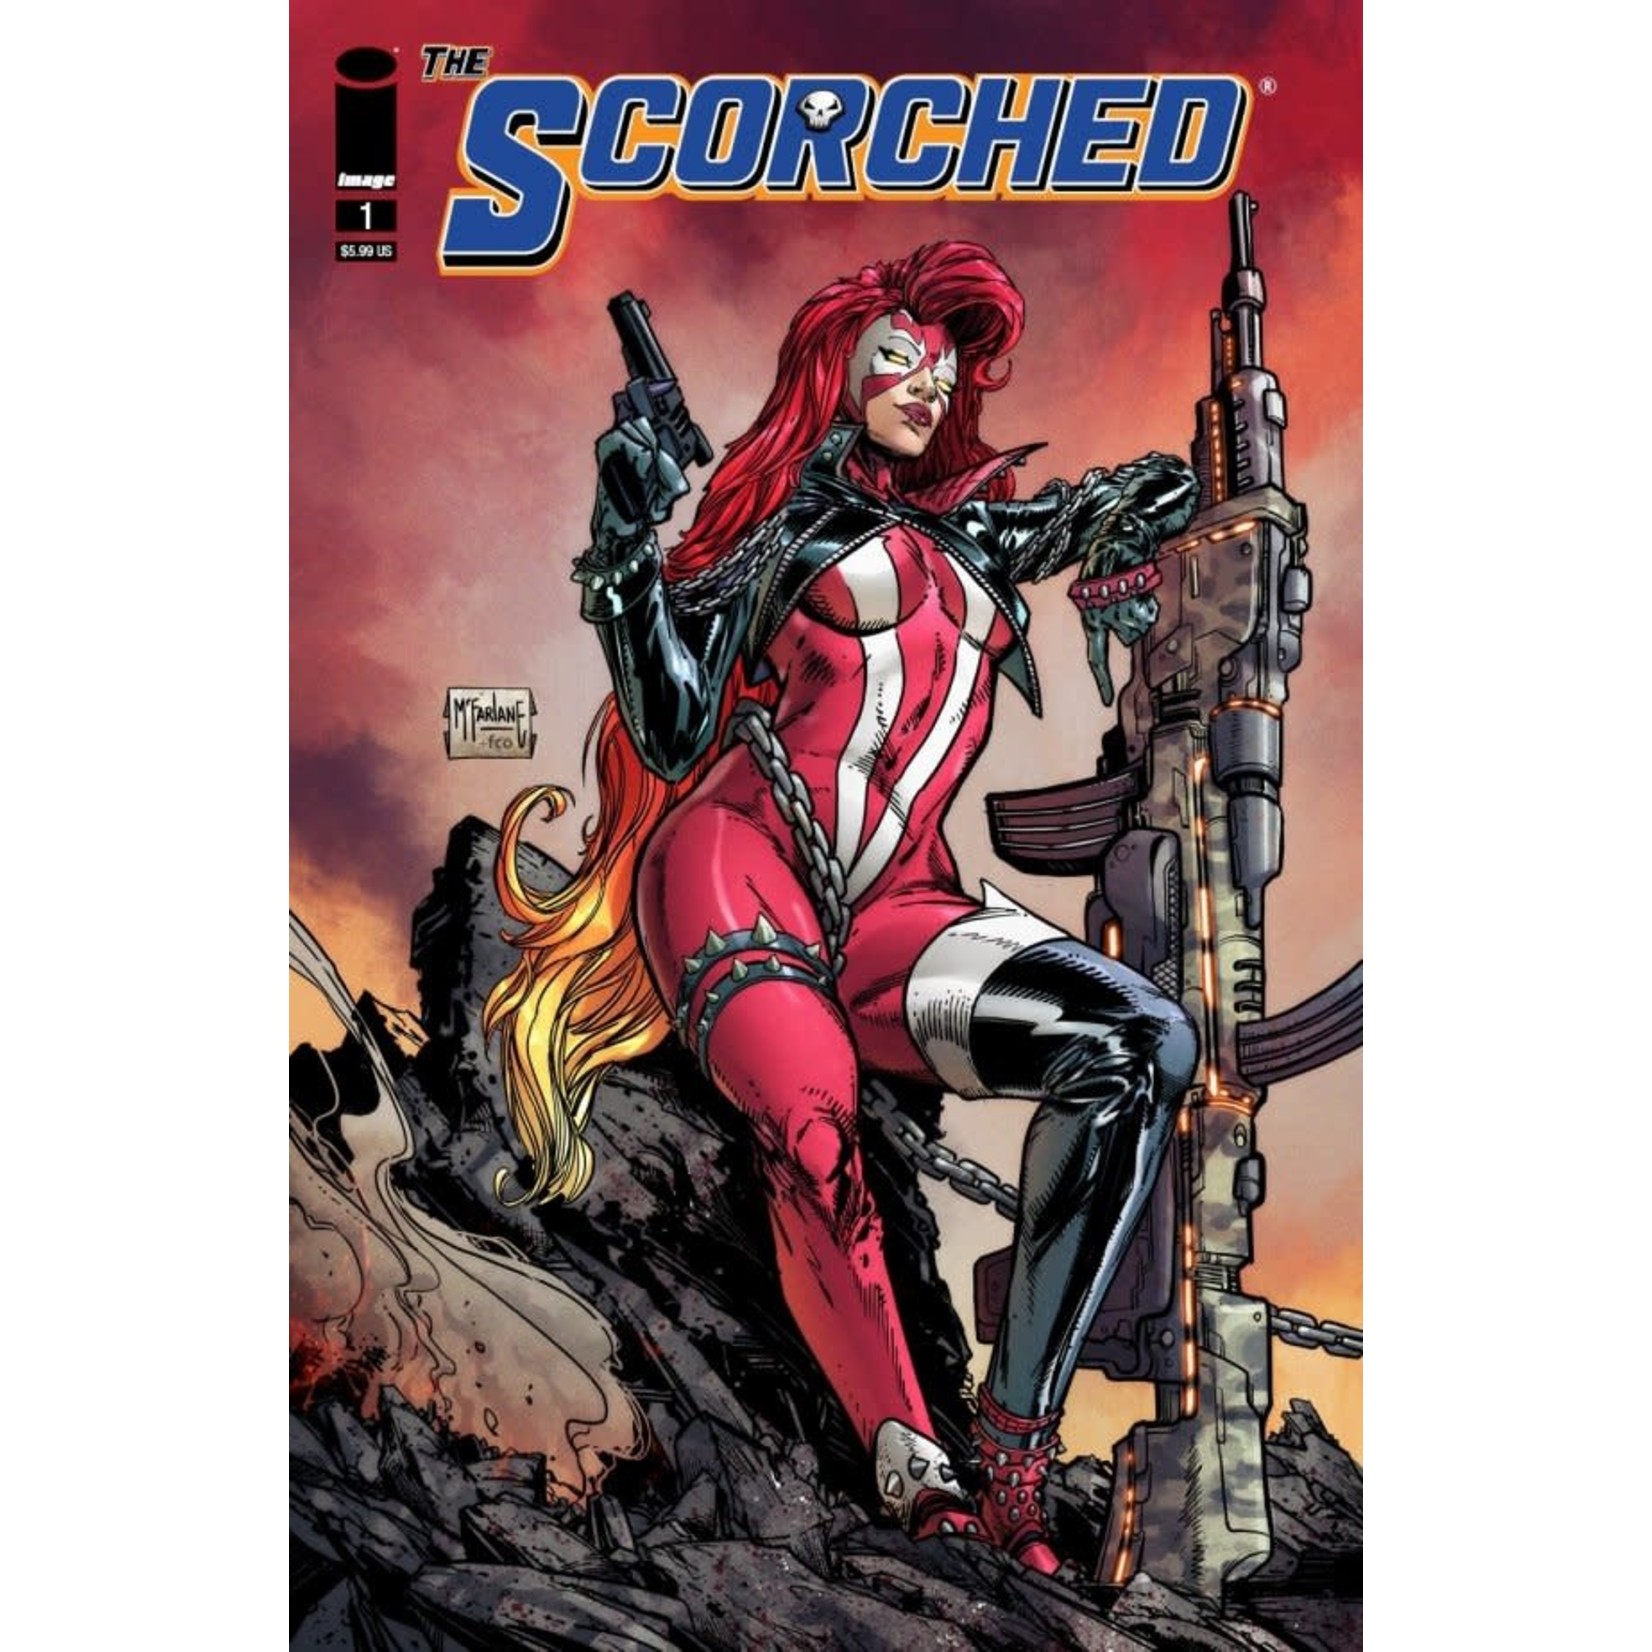 Image The Scorched #1 Cover D McFarlane